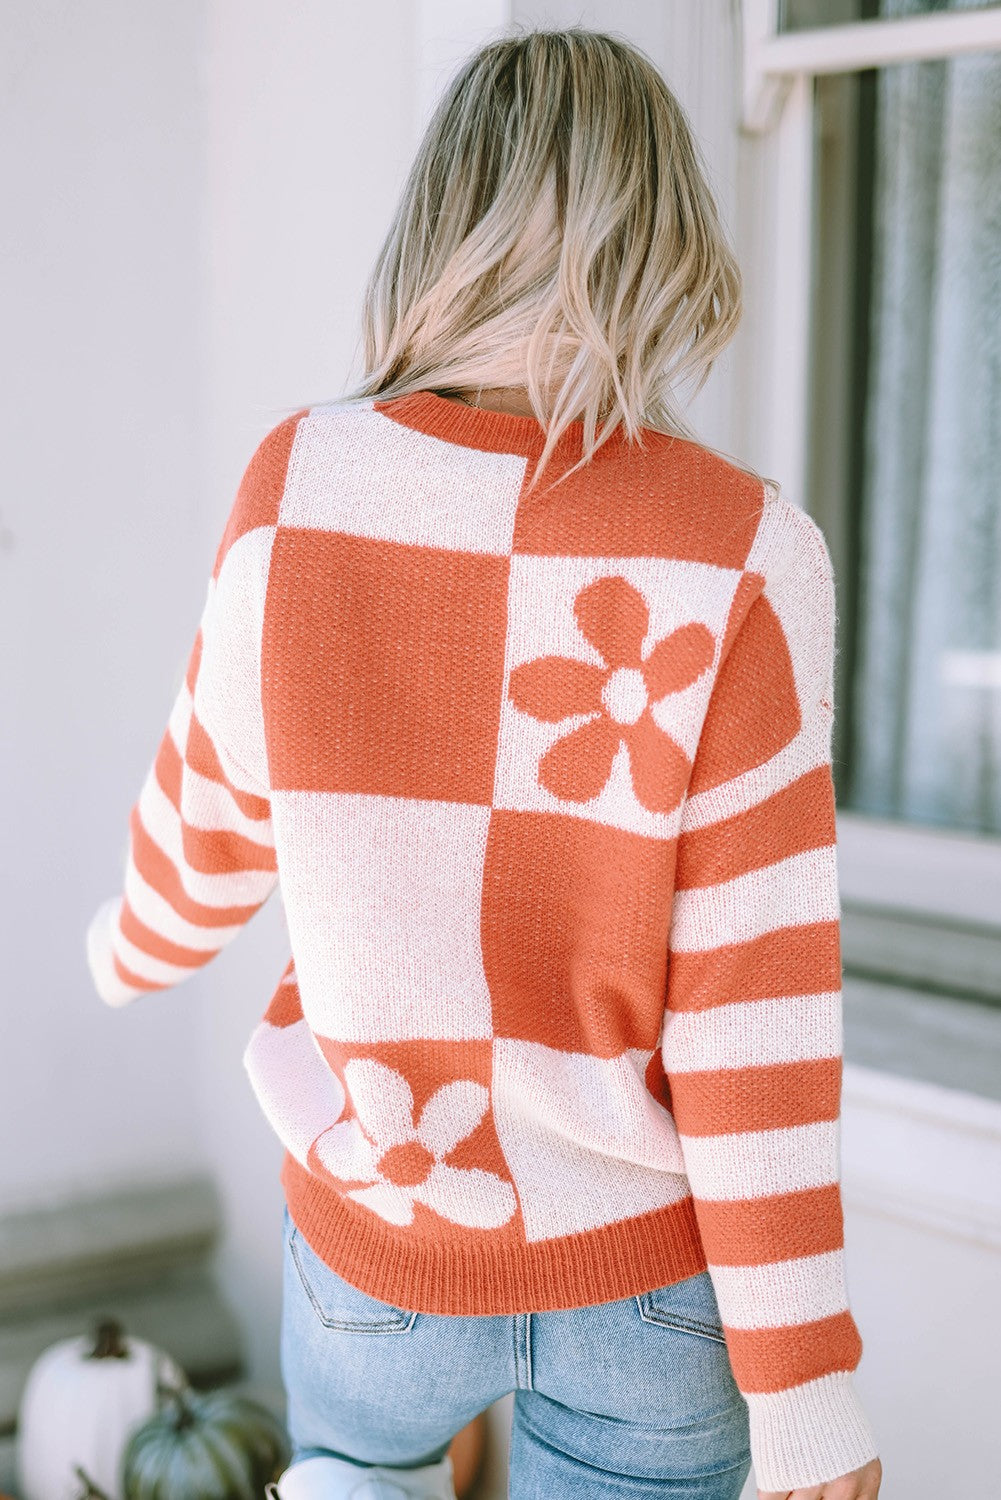 - Checkered Floral Print Sweater